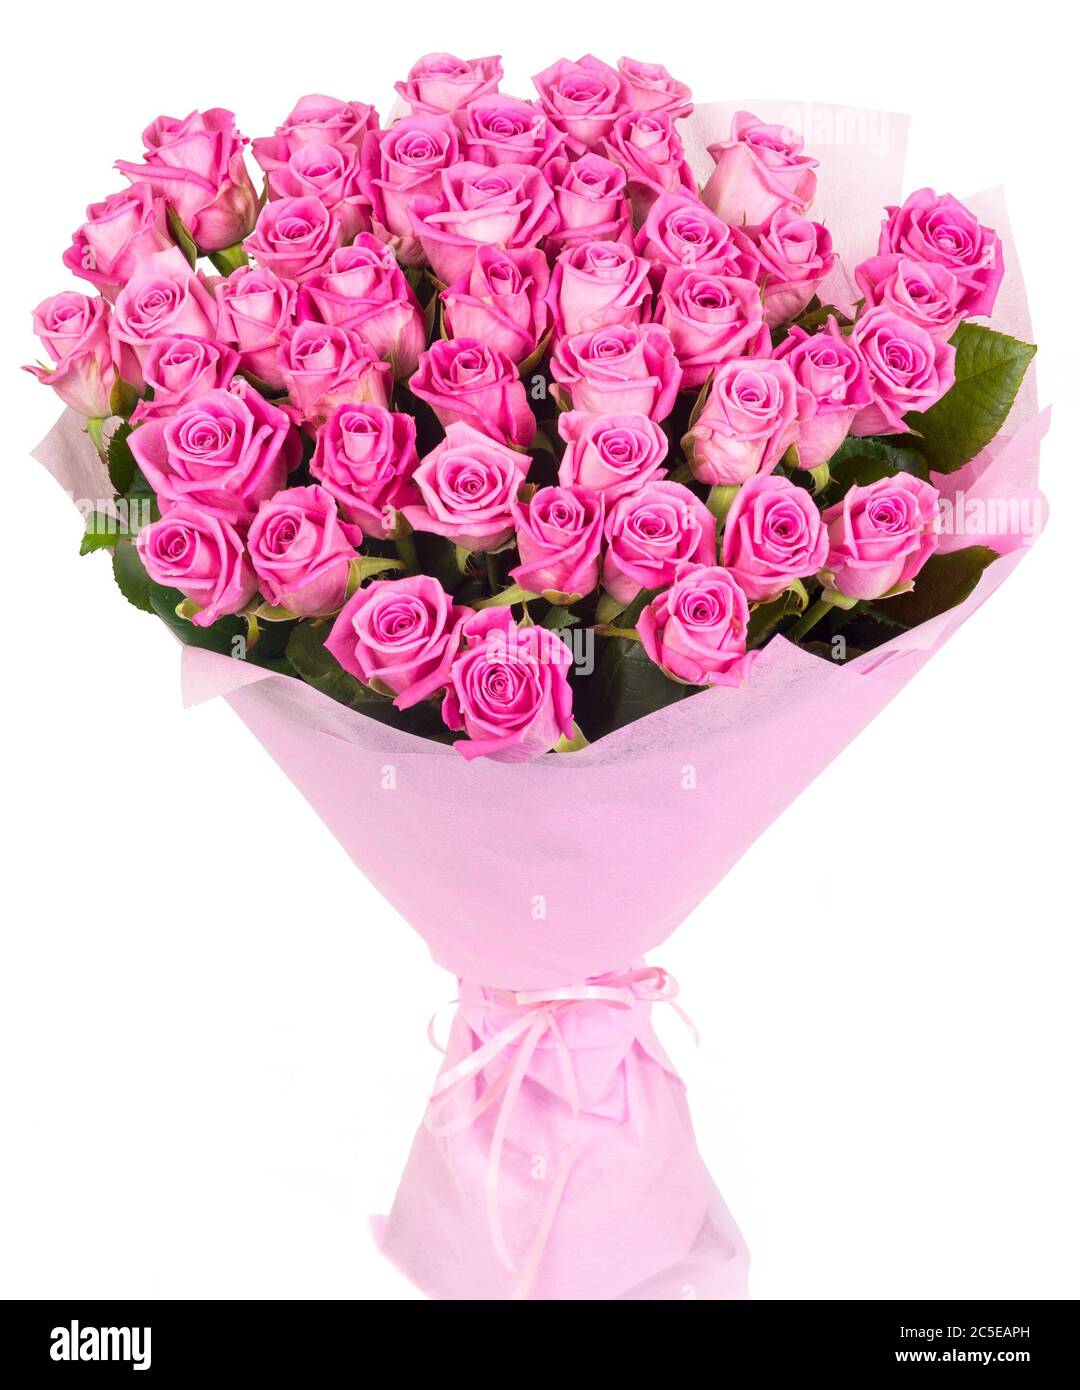 Bouquet of pink roses isolated on white background Stock Photo